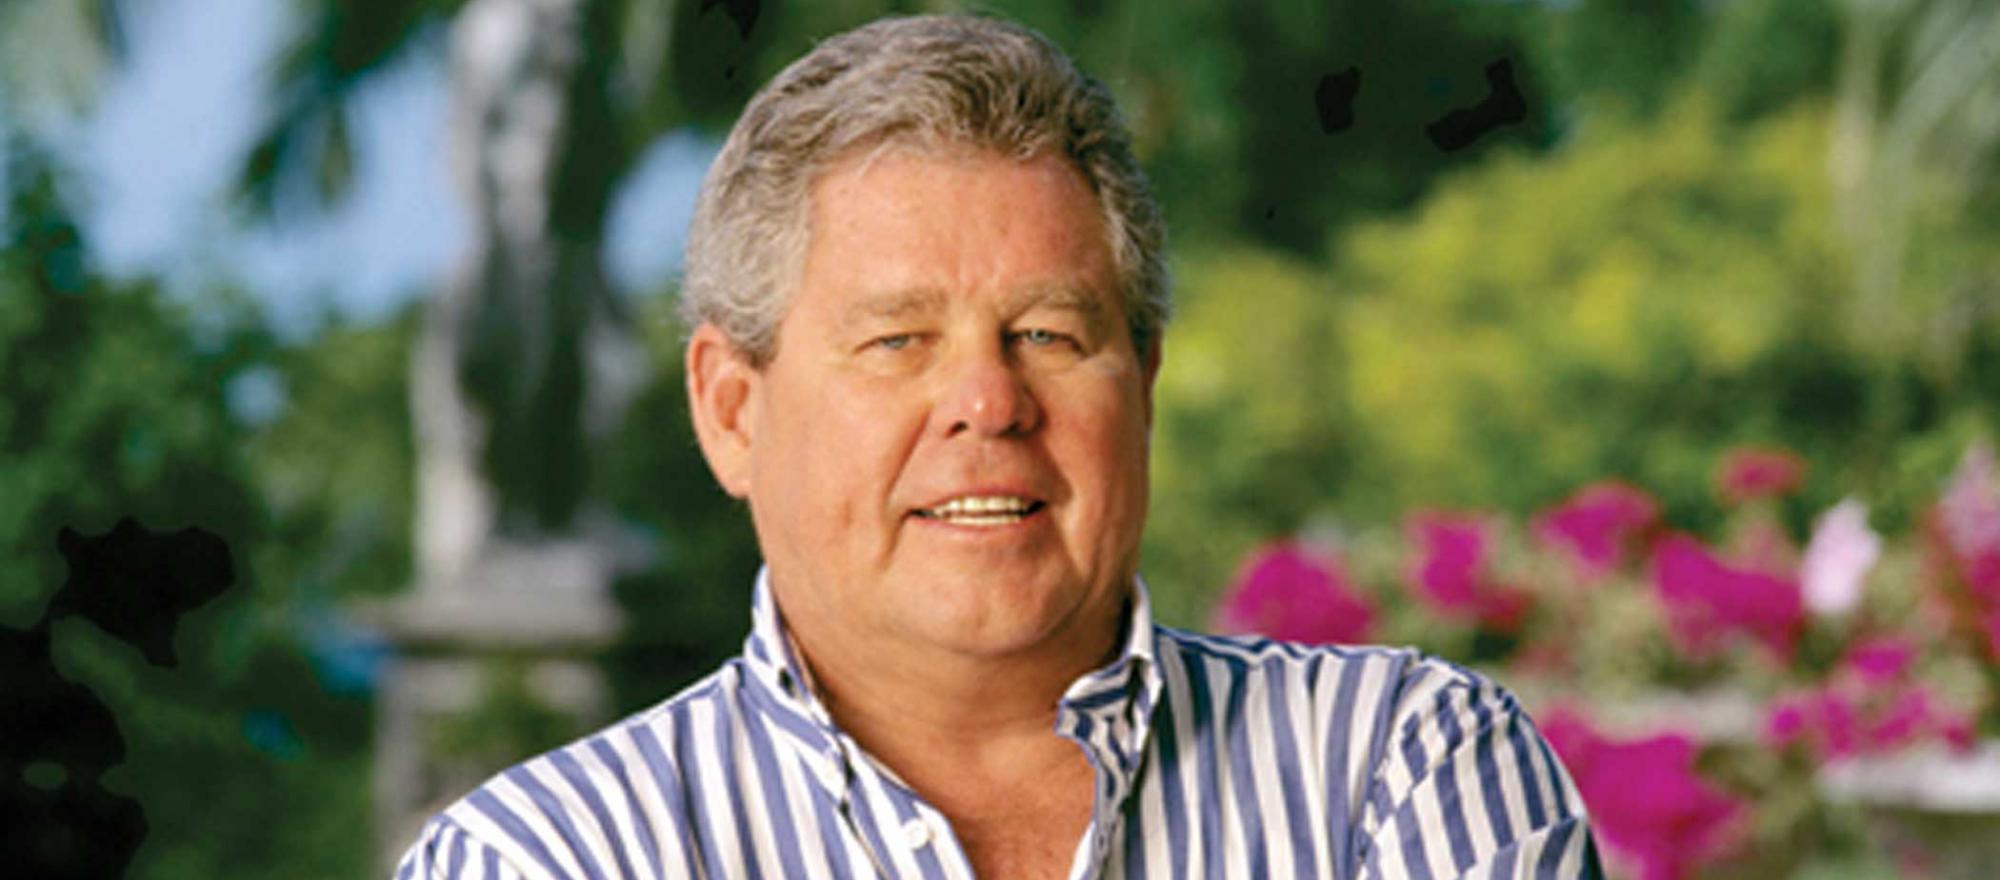 The Sandals Resorts chain founder turned a tiny business into a billion-dollar empire.